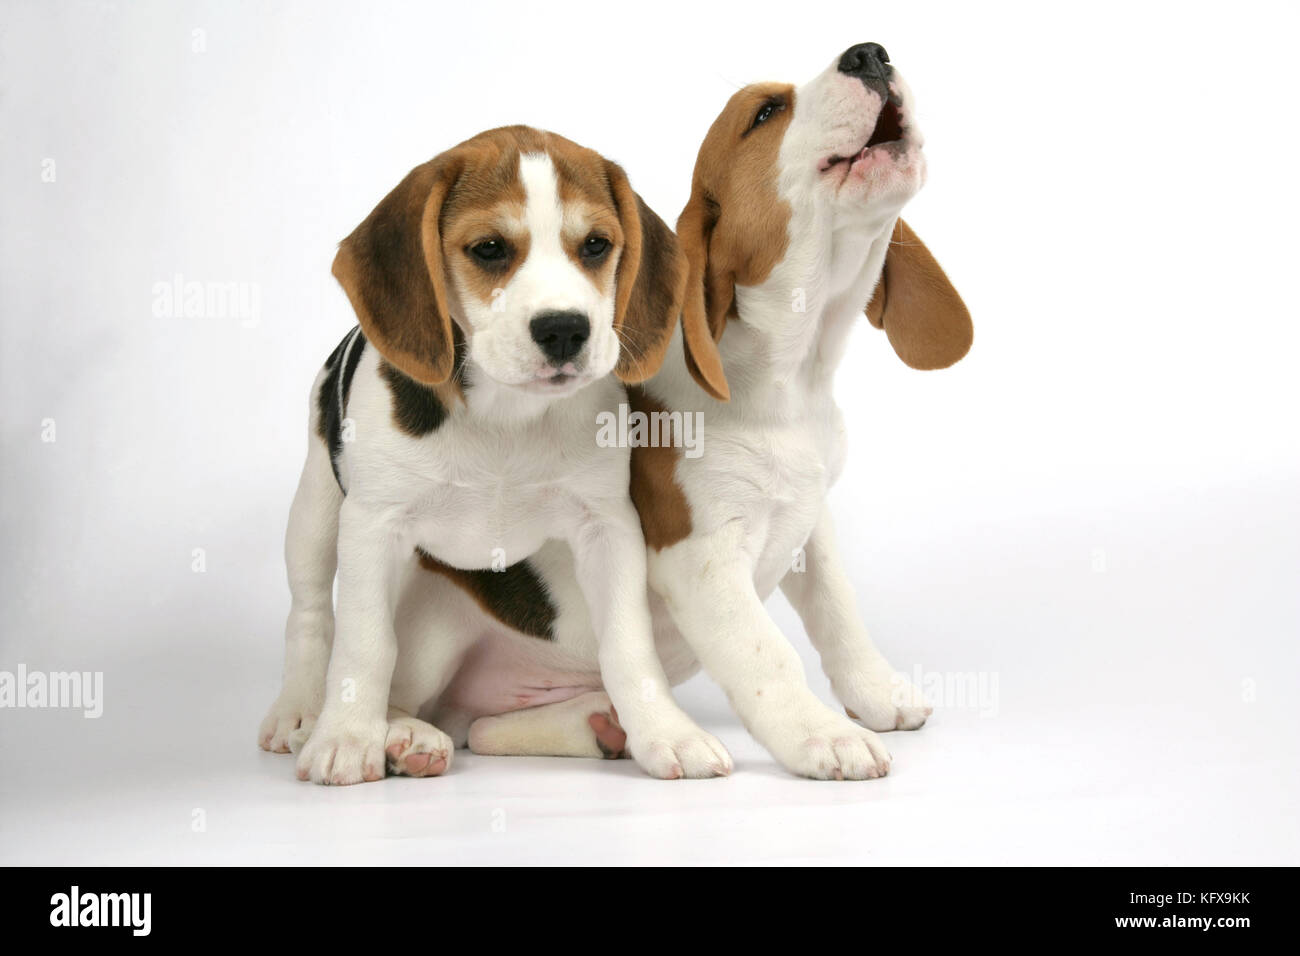 Dog - Beagle Puppies sitting down, one howling. Stock Photo